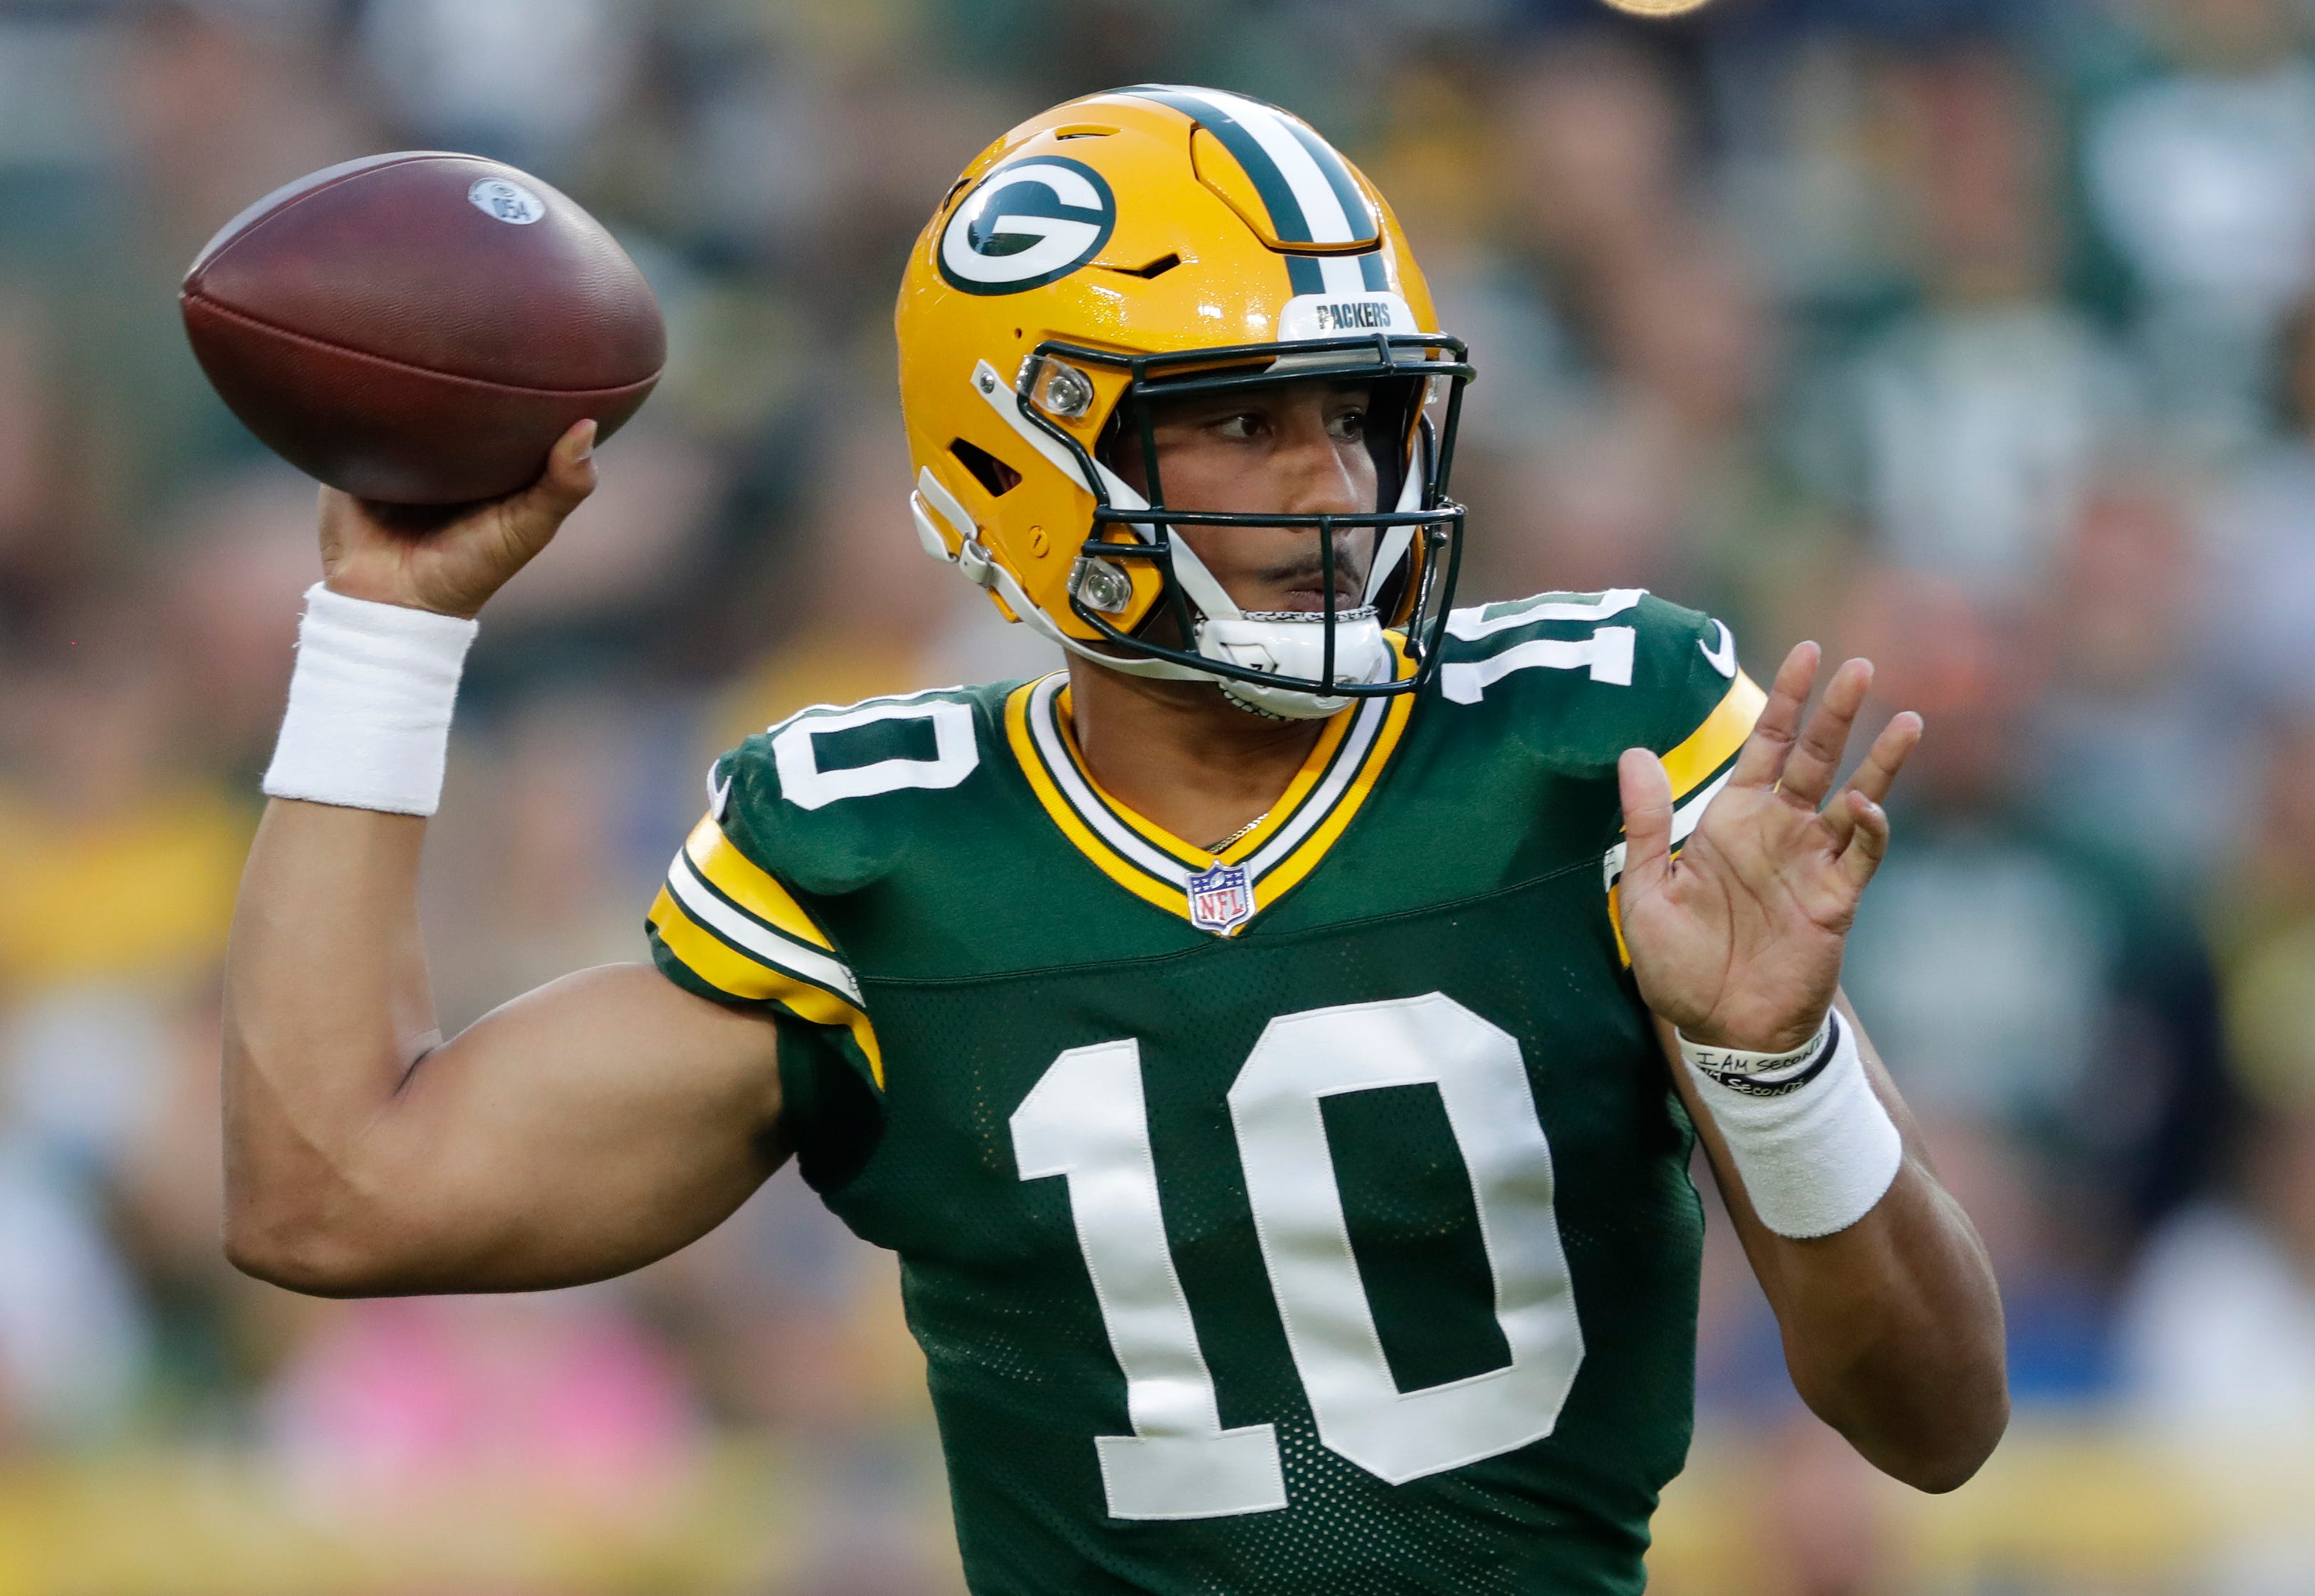 Green Bay Packers quarterback Jordan Love (10) looks to throw in the first quarter in the team's first preseason game against the Houston Texans on Saturday, Aug. 14, 2021, at Lambeau Field in Green Bay.